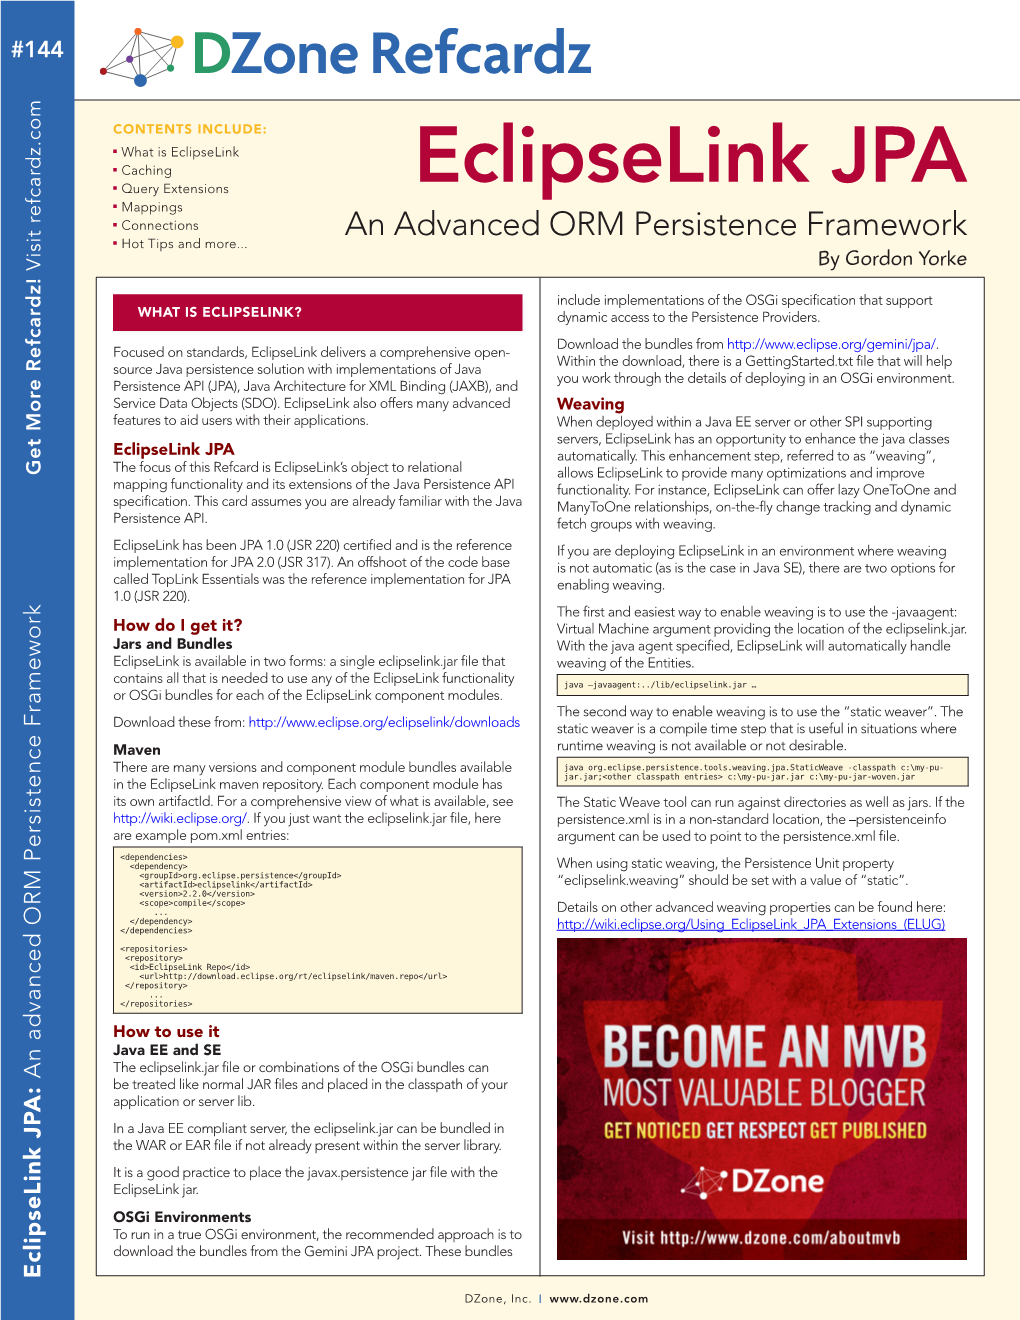 Eclipselink N Caching N Query Extensions Eclipselink JPA N Mappings N Connections an Advanced ORM Persistence Framework N Hot Tips and More